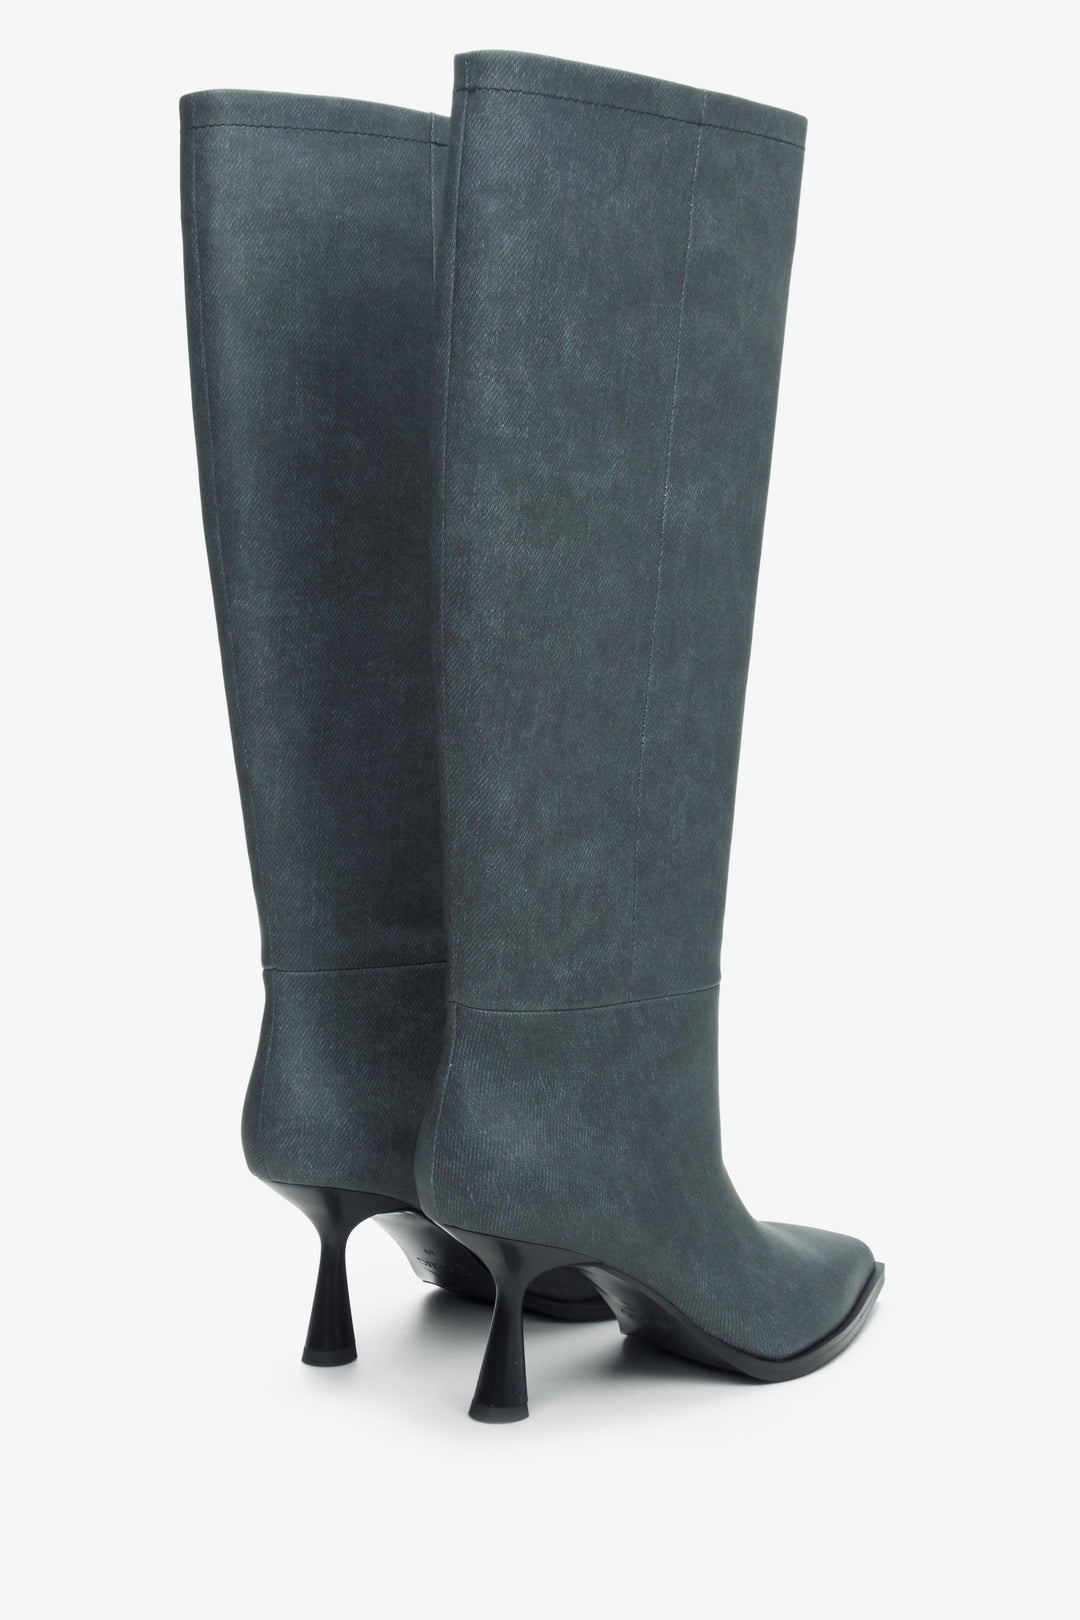 Grey women's boots with a stiletto heel by Estro - close-up on the back of the boot and side seam.